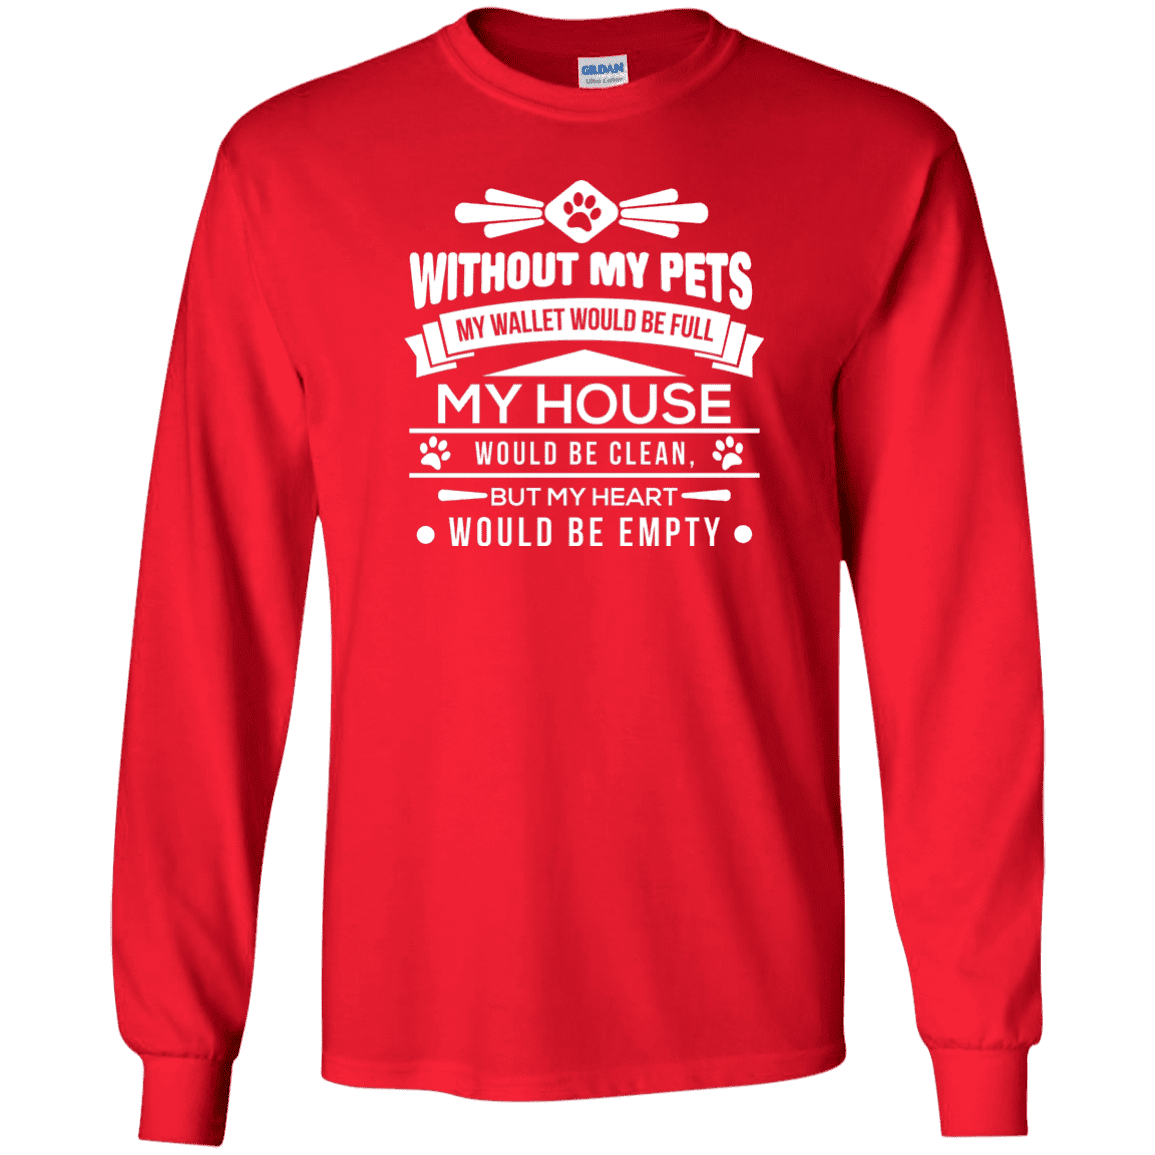 Without My Pets - Long Sleeve T Shirt.